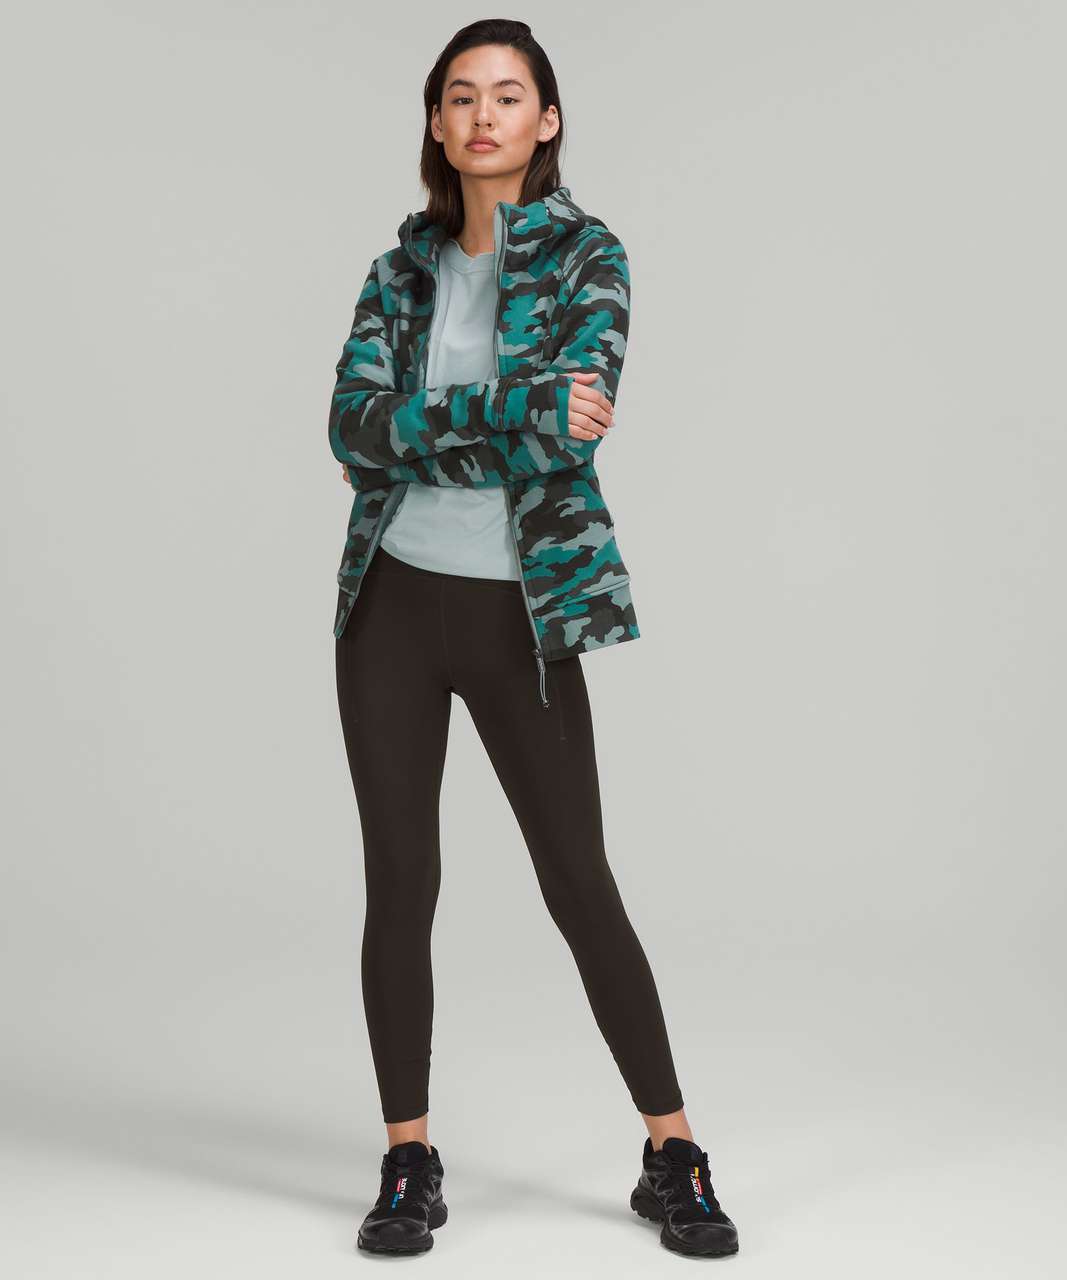 playing with mixing colors. Scuba Full Zip in Tidewater Teal,(M/L) Like a  Cloud High Neck Longline Bra in Artifact (8) and Groove HR Pant in Bronze  Green (6) : r/lululemon